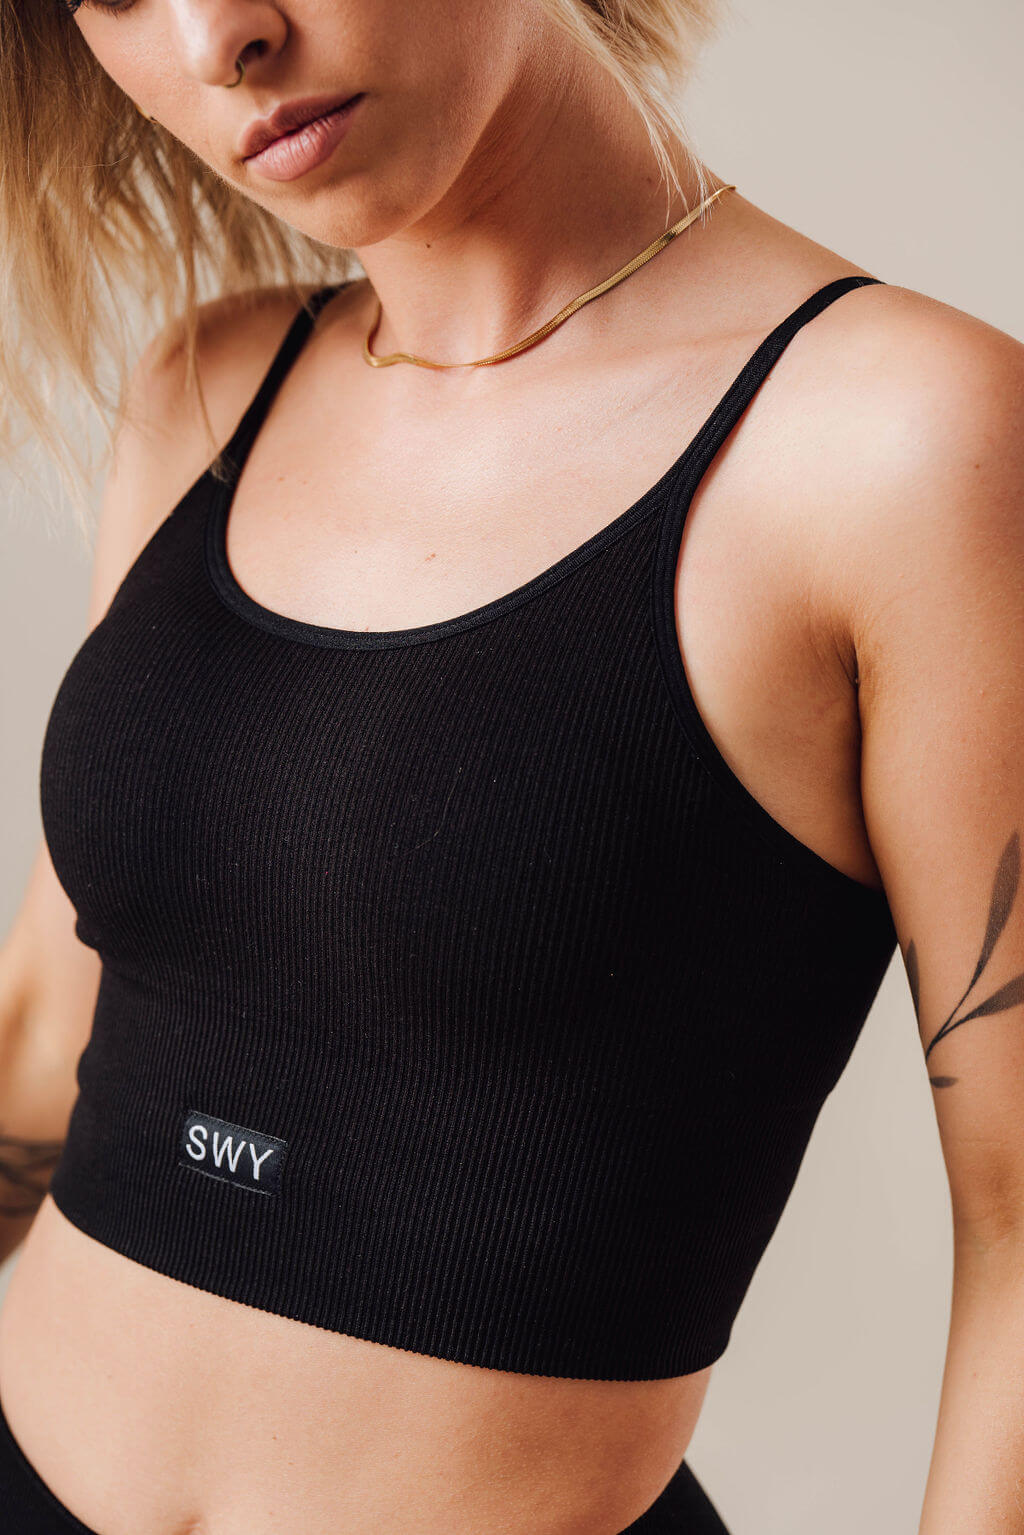 Swy's Serenity Cross Top in black color removable pads which provides a medium breast support 